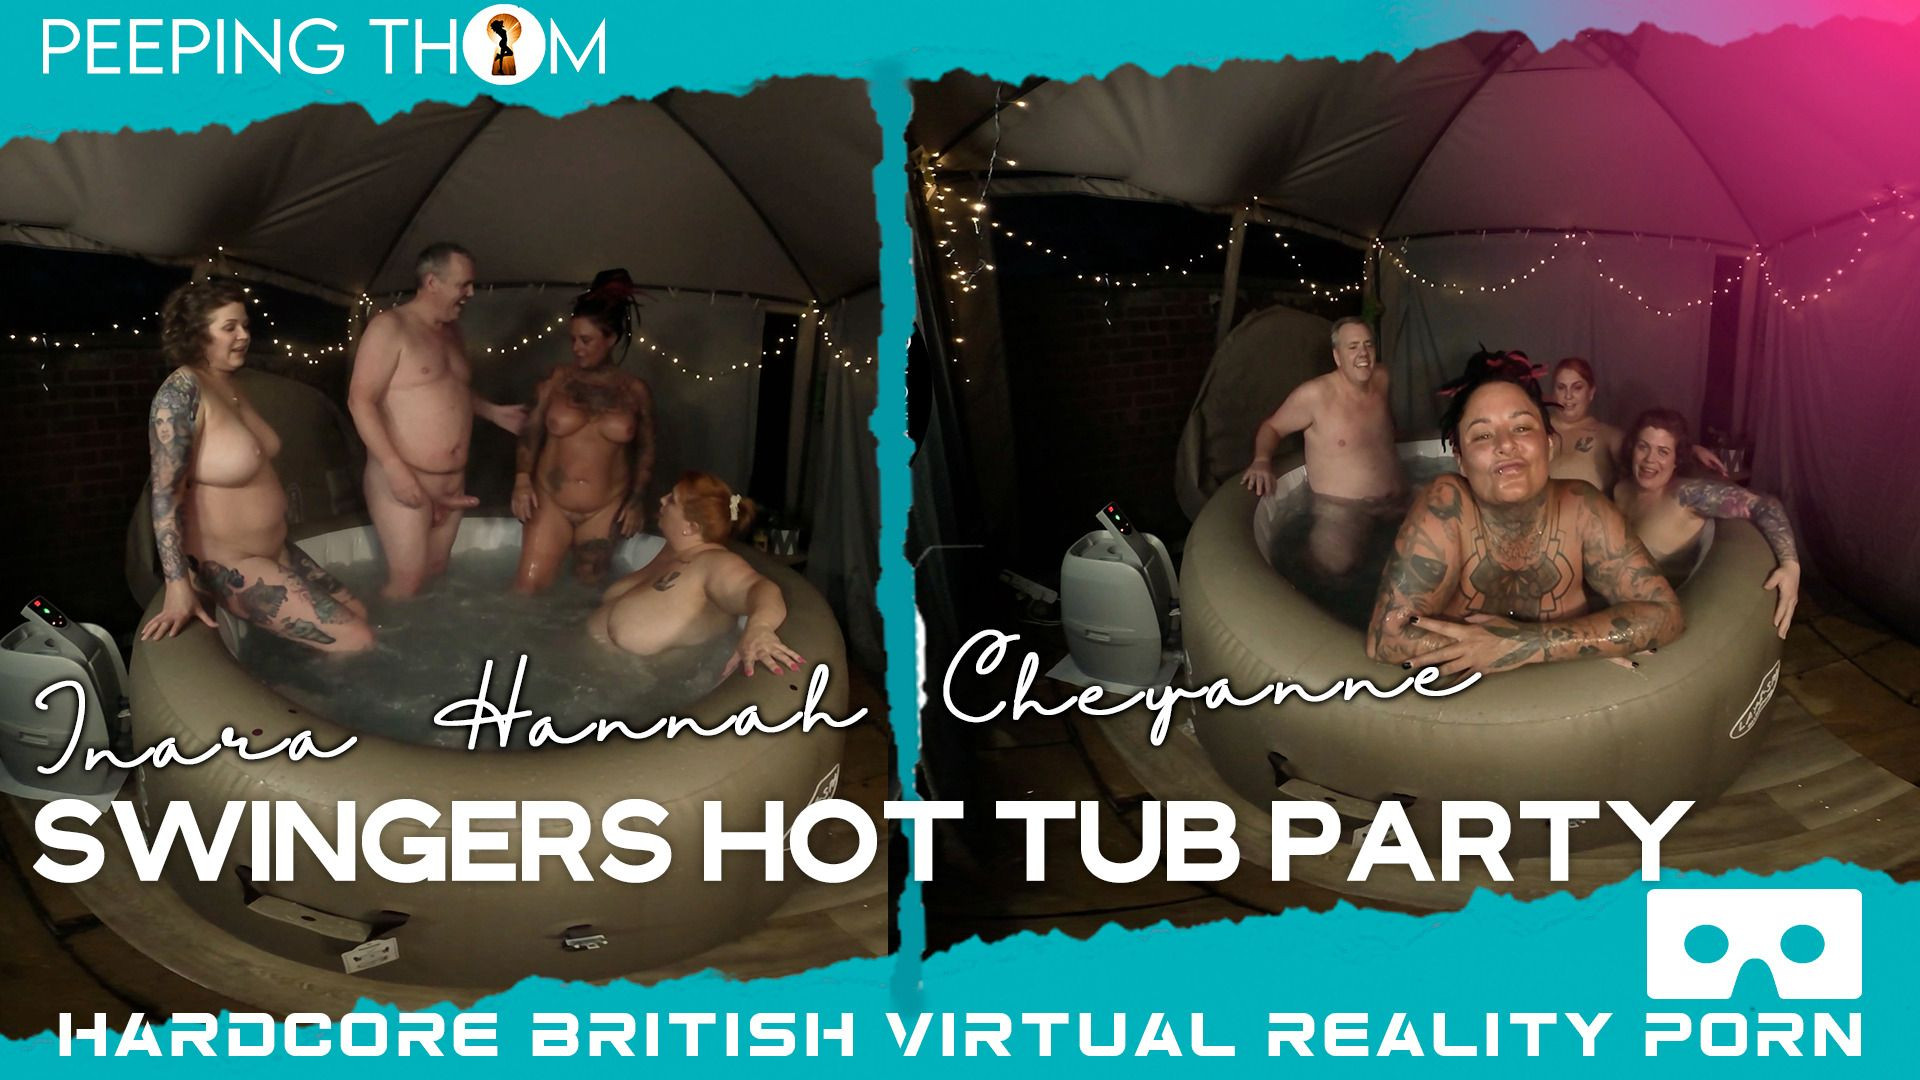 Hot Tub Party At Thoms House - FFFM Thick Foursome Outdoors: Inara Stark Slideshow